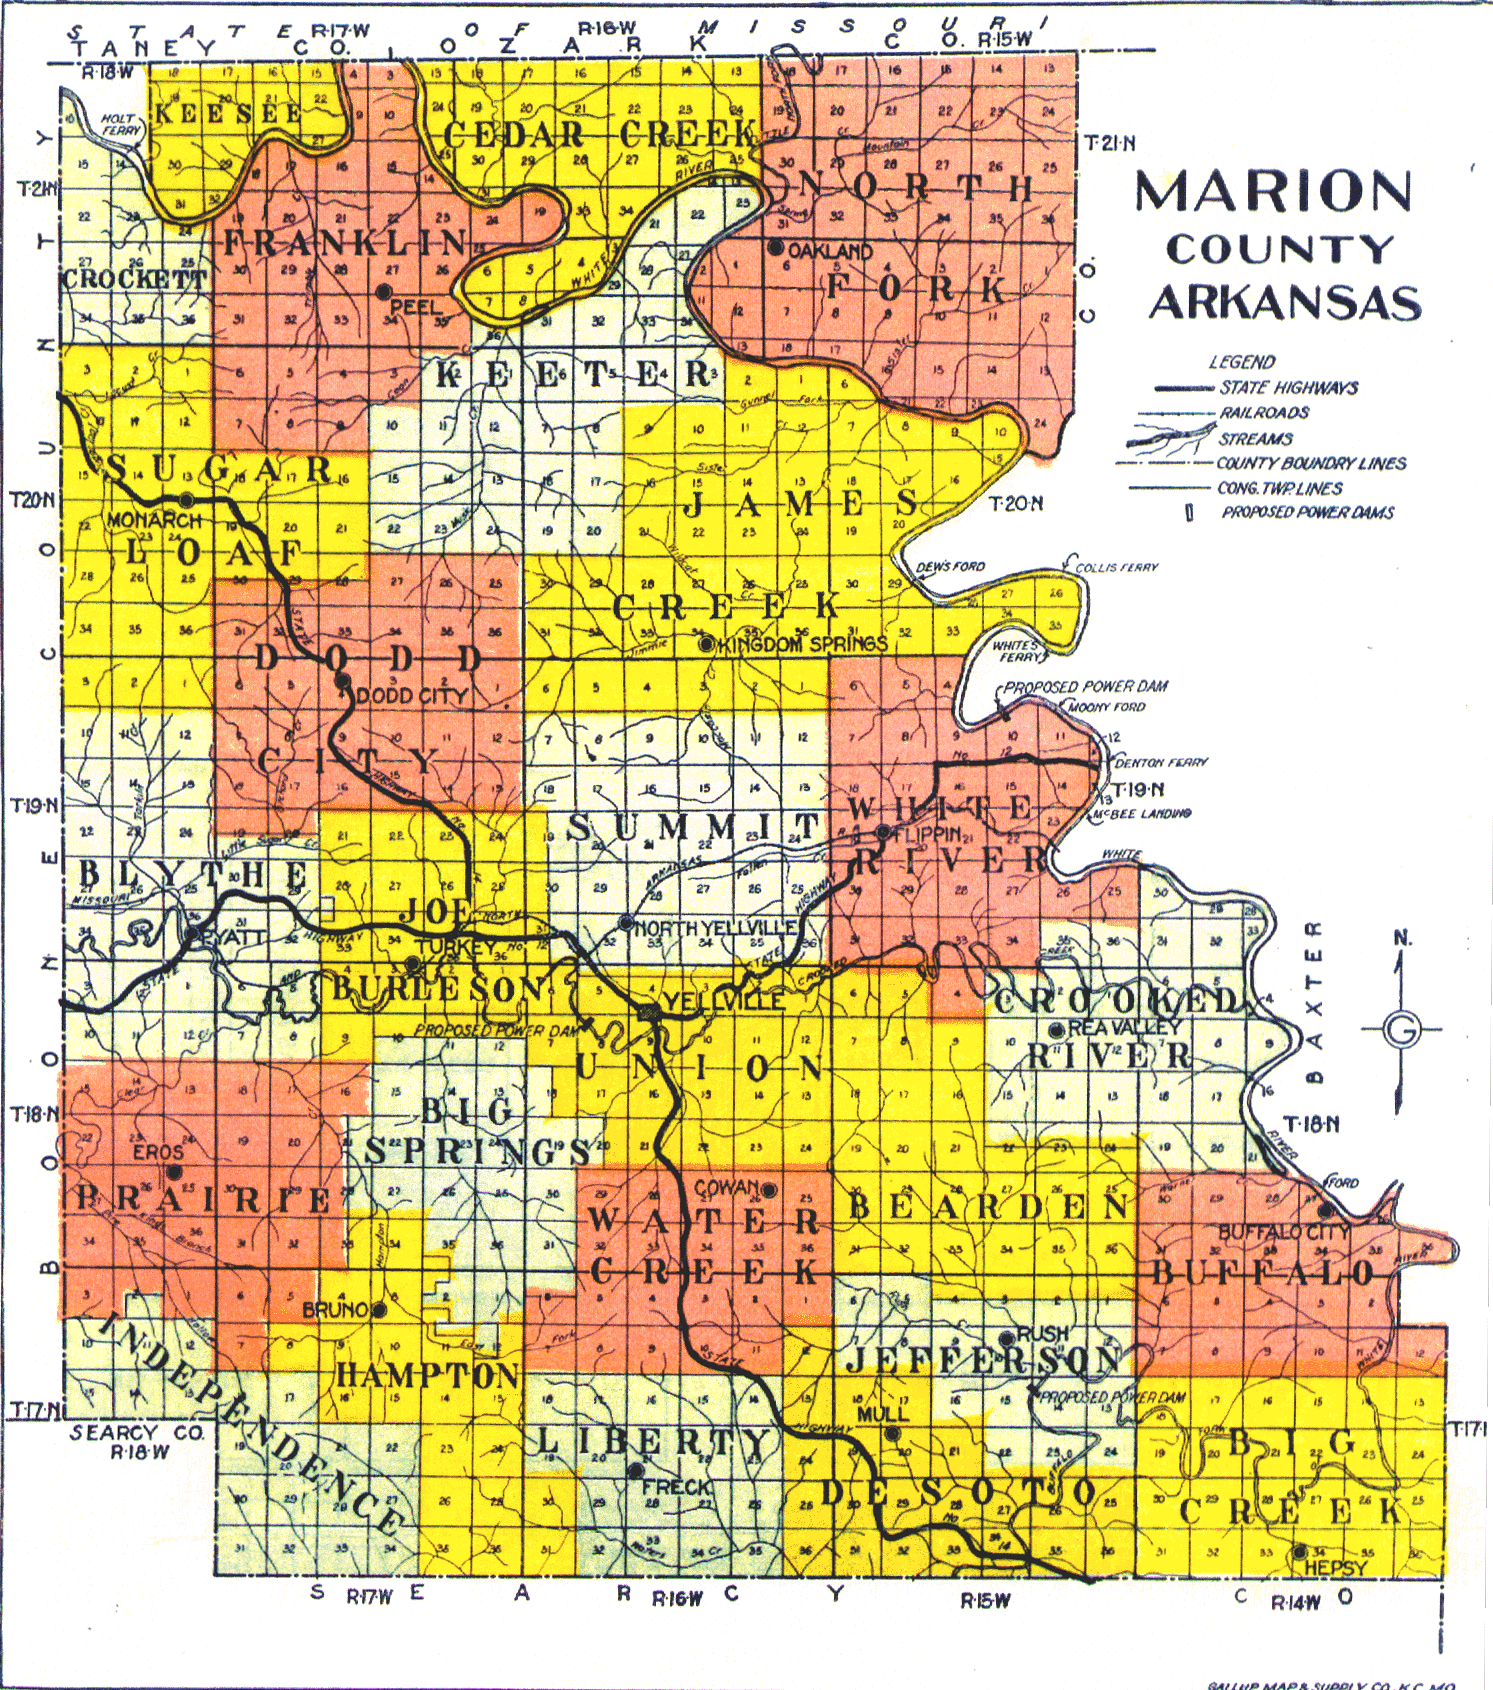 Marion Co AR Townships map